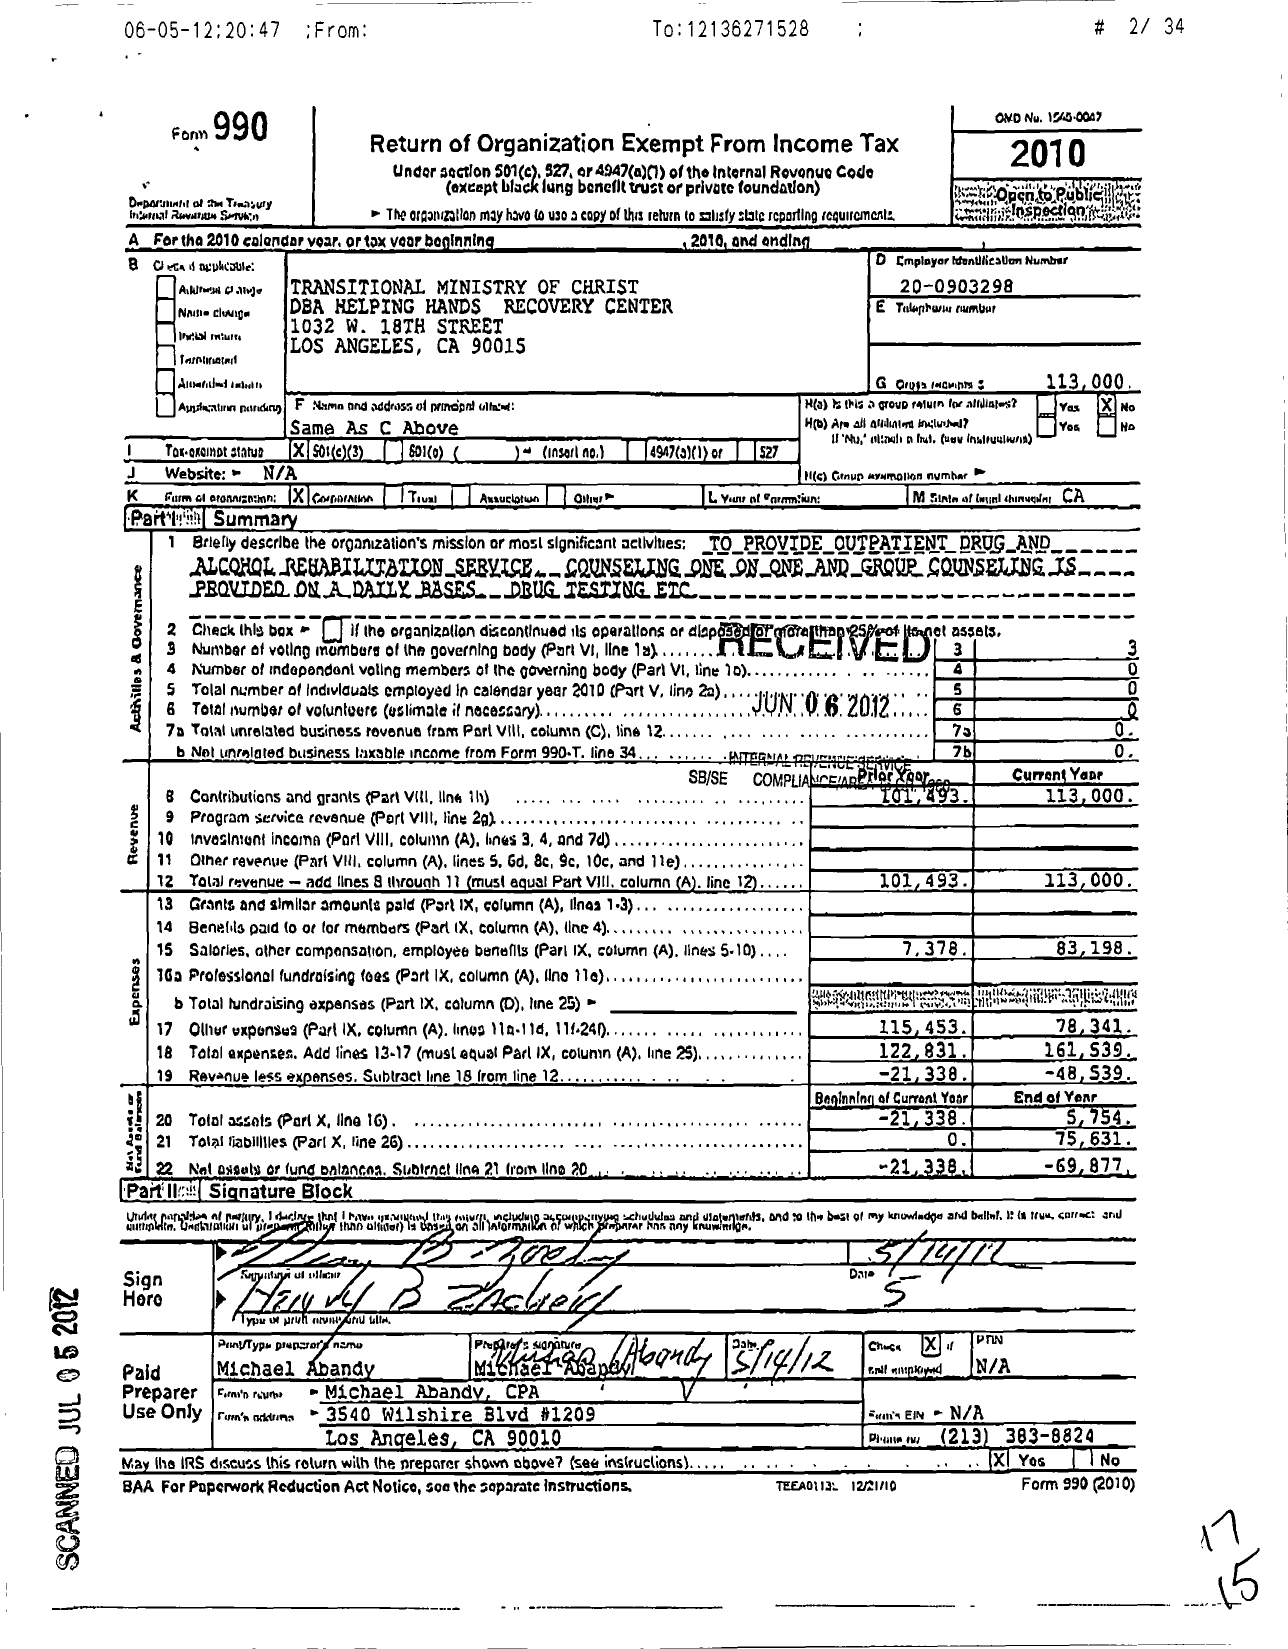 Image of first page of 2010 Form 990 for Transitional Ministry of Christ